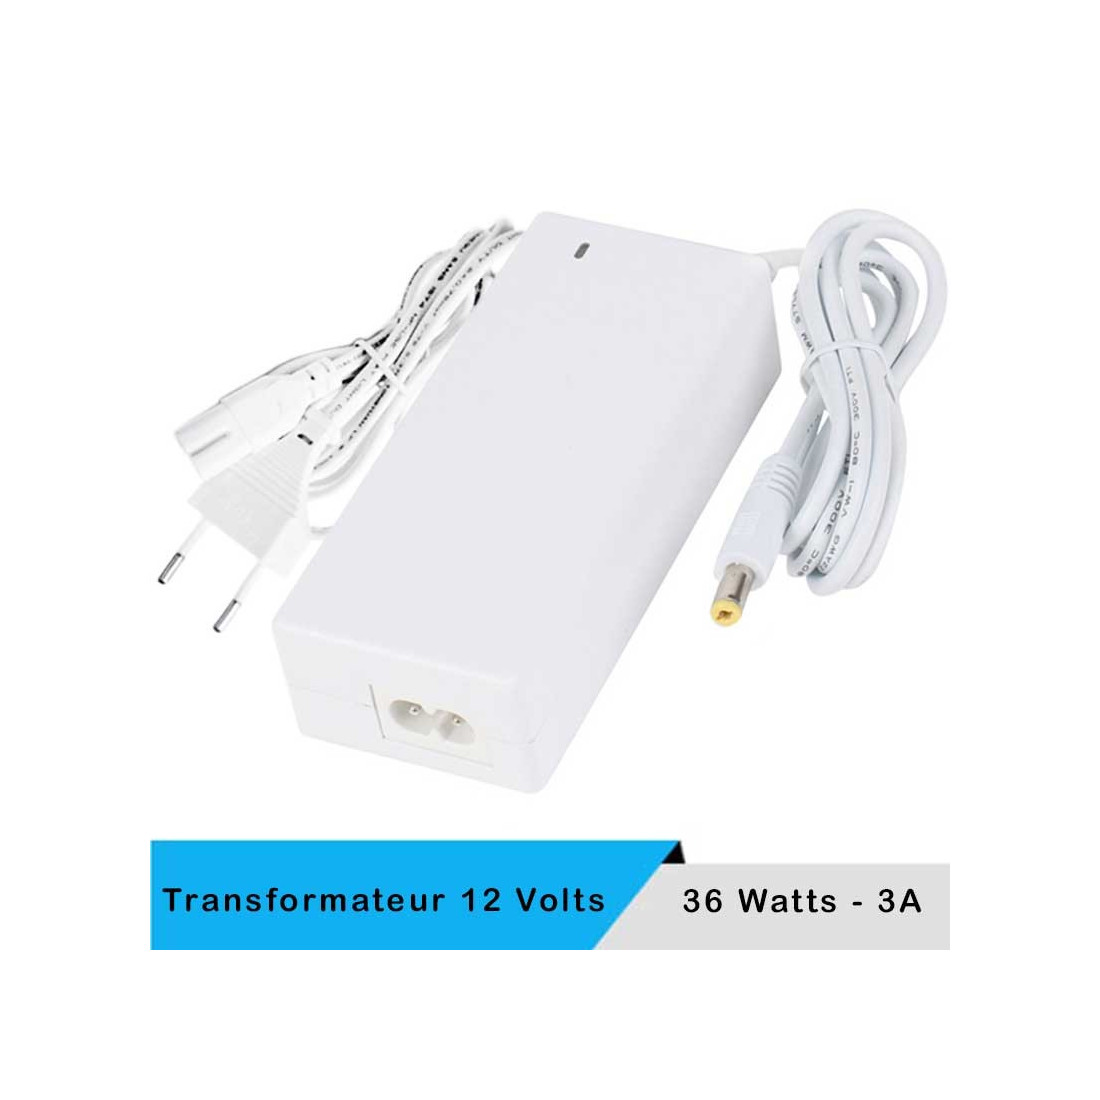 https://www.starled.fr/5277-thickbox_default/transformateur-led-12-volts-jack-2-5mm-36-watts-blanc-cable-secteur.jpg